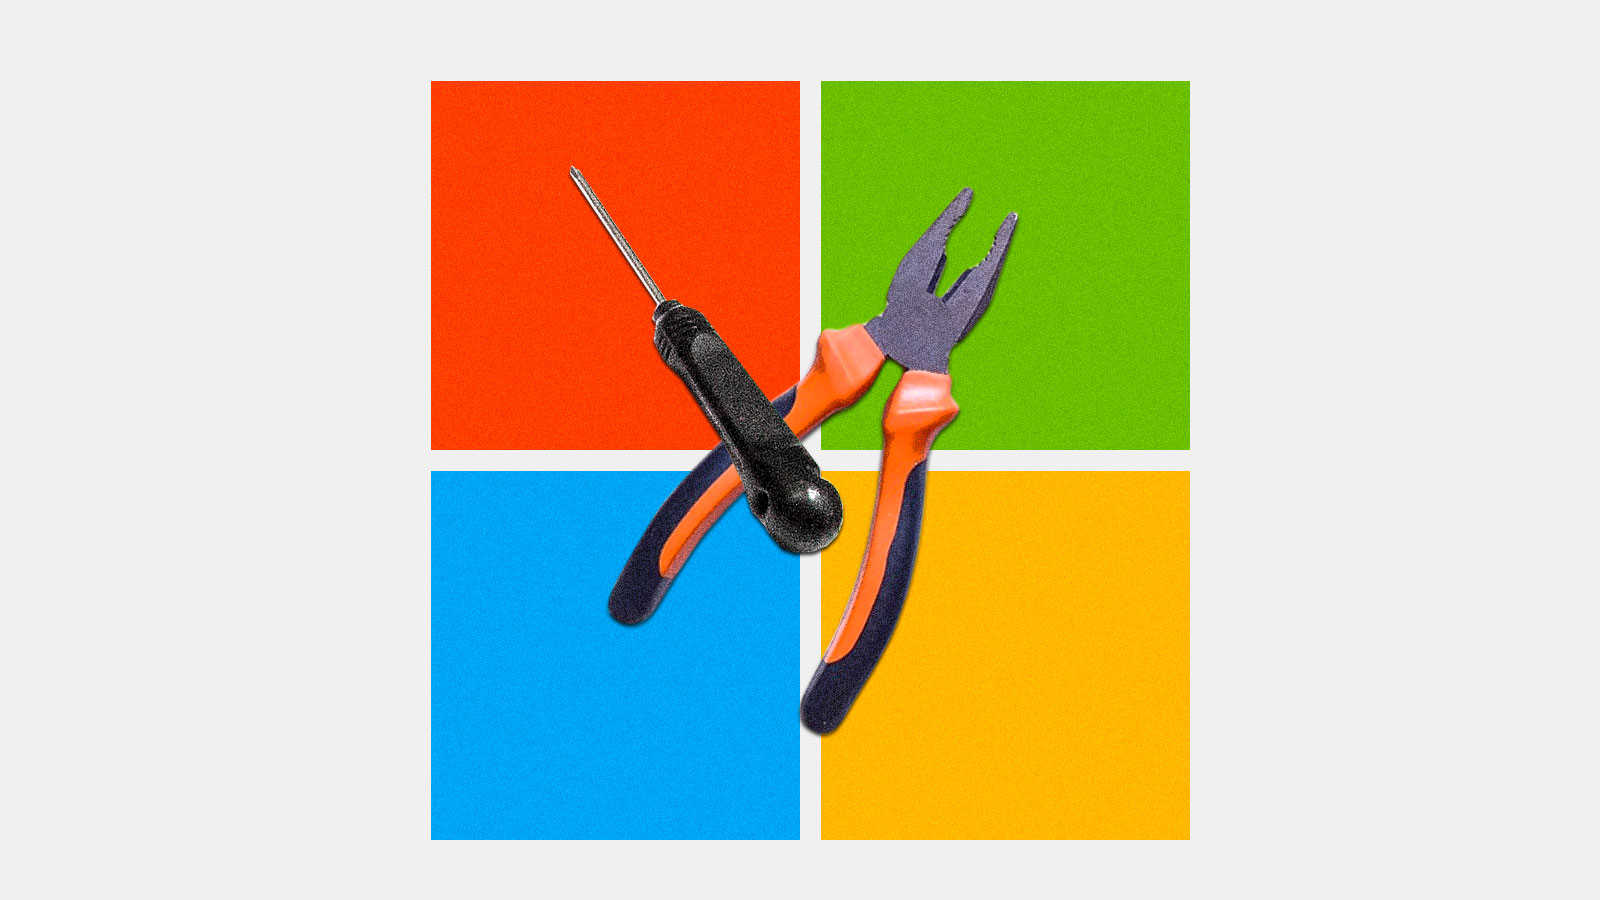 Microsoft logo with a screwdriver and pliers on top of it